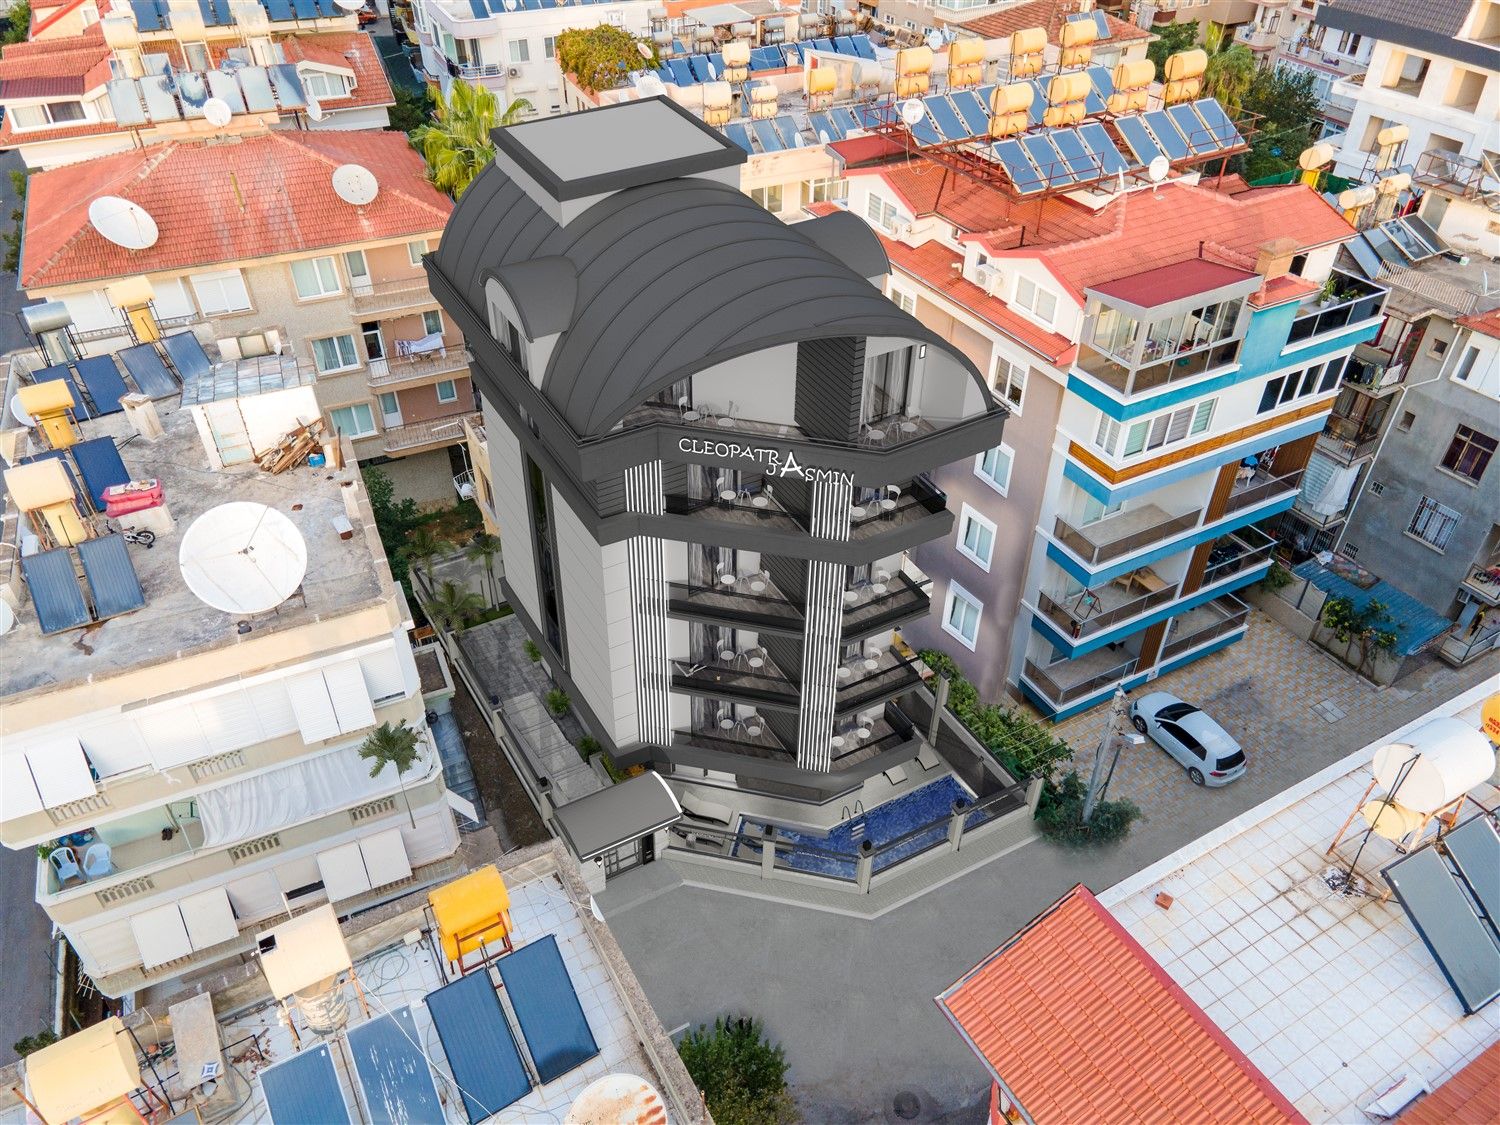 Penthous 2+1 in the center of Alanya, Cleopatra Beach district